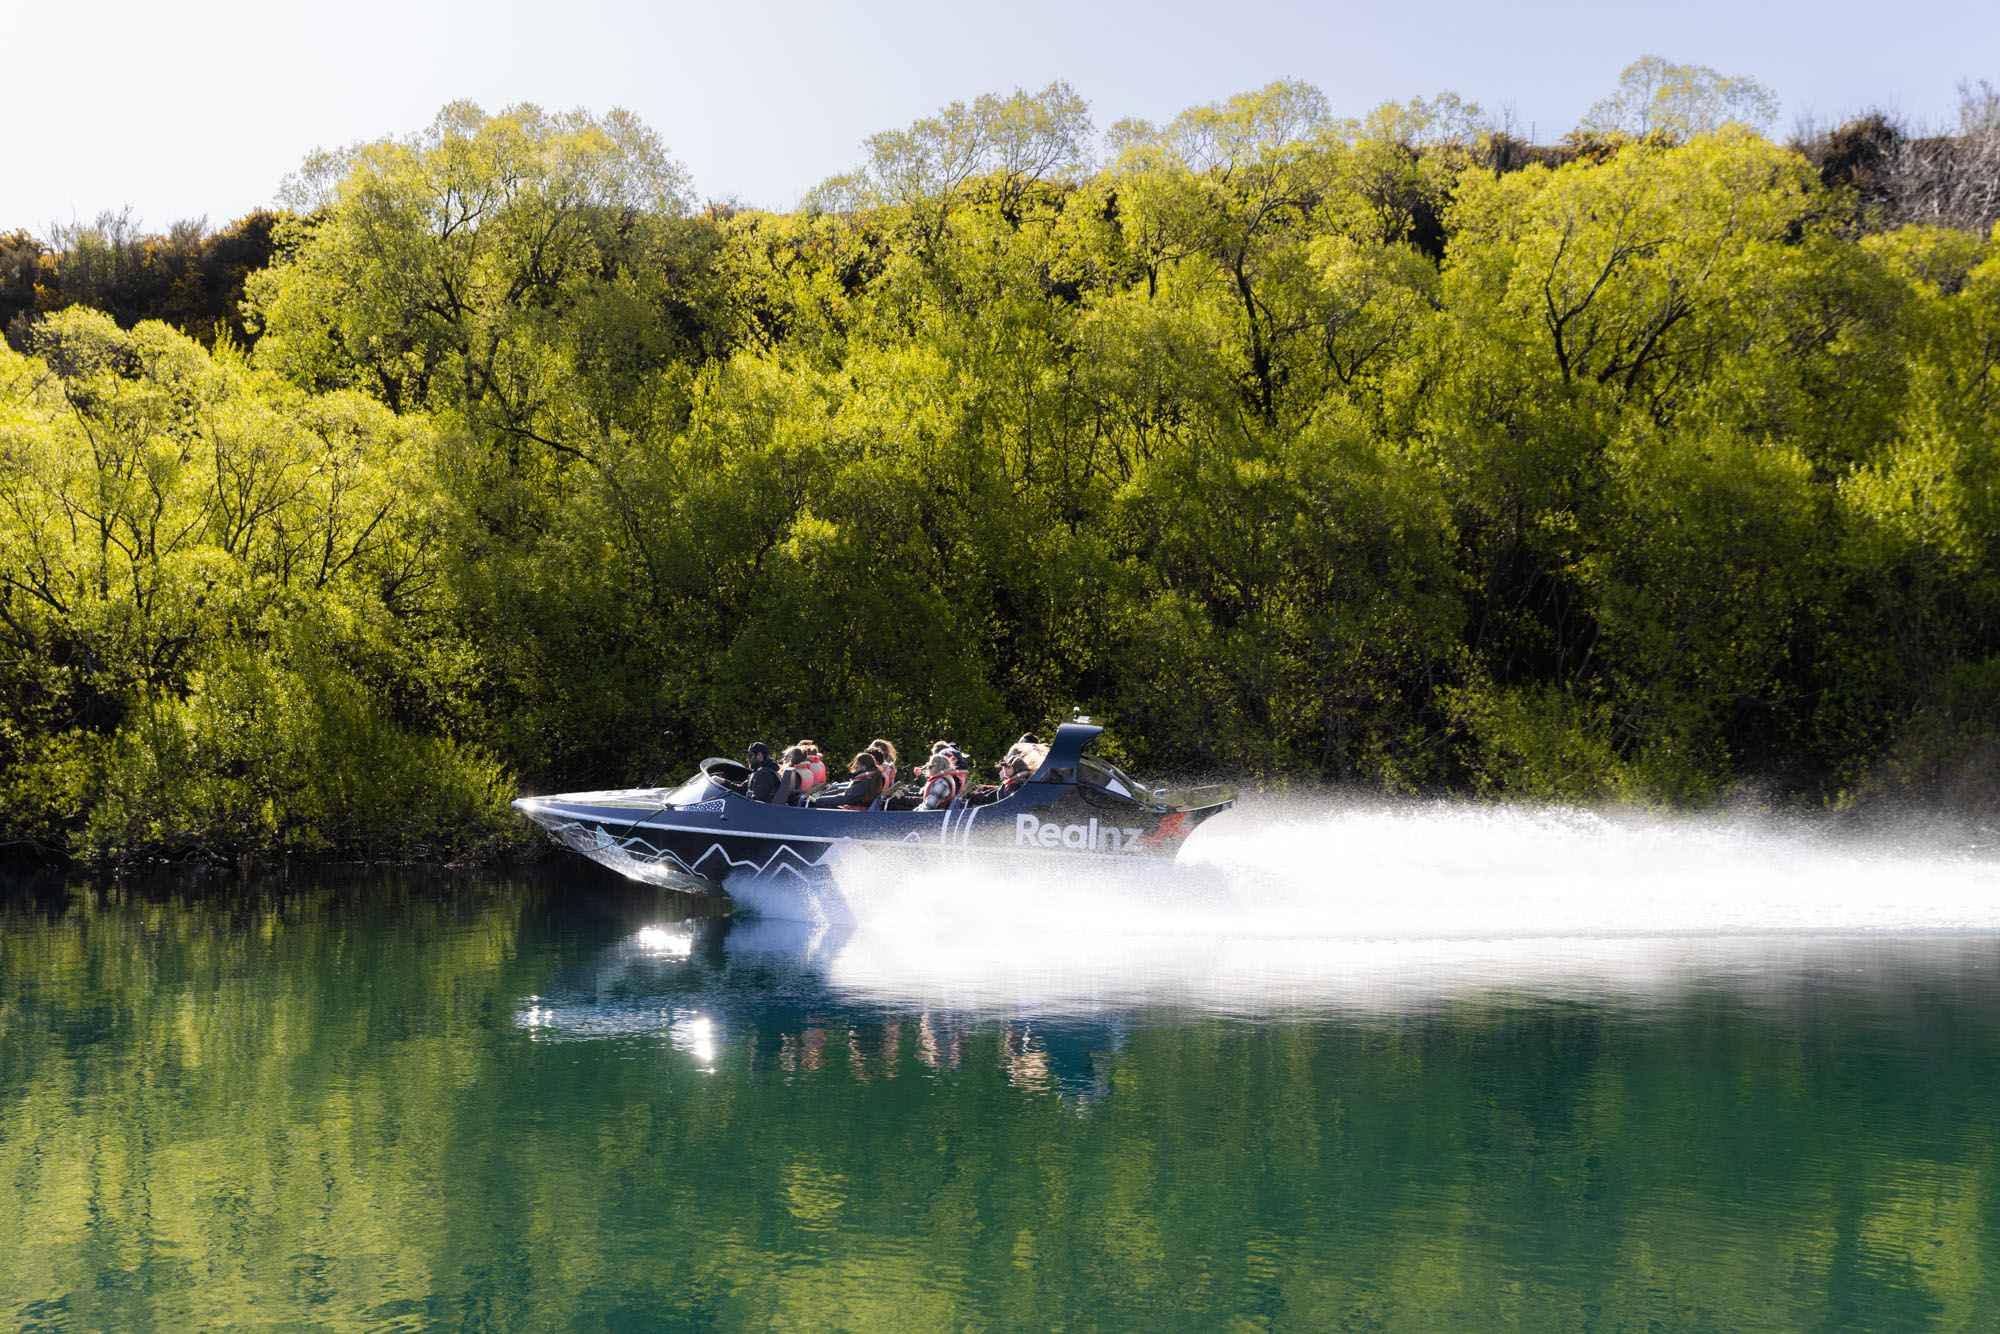 Jump straight into the adventure from the heart of Queenstown and explore the surrounding hidden landscapes via Jet Boat on our 25-minute journey.